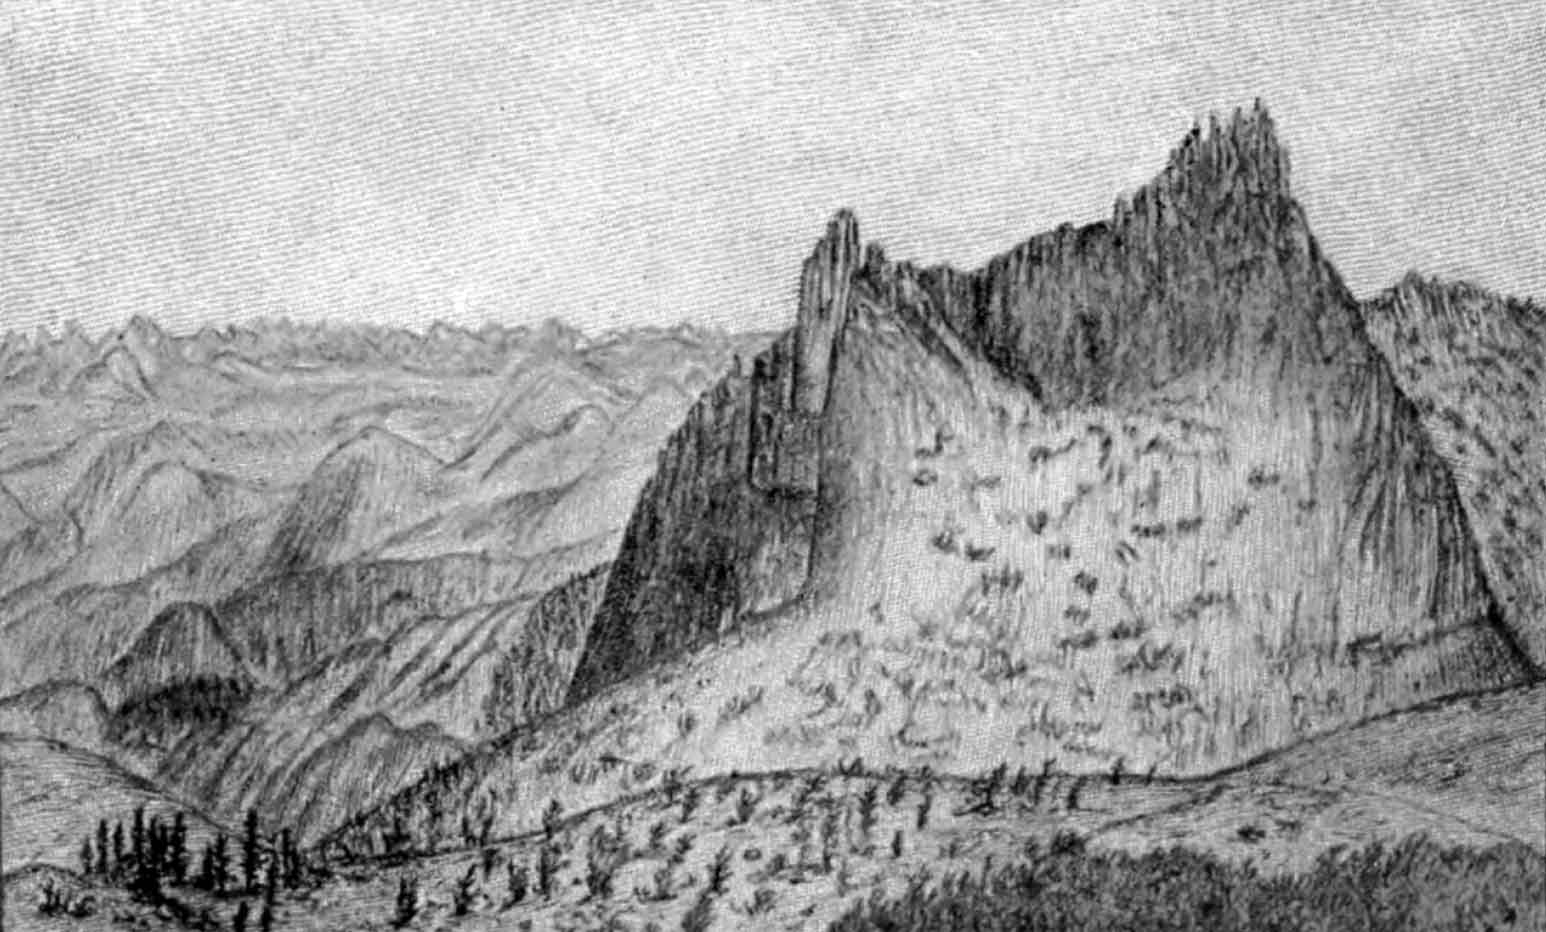 A sketch of a large, ragged-edged granite pinnacle with rolling hills in the distance and sparse vegetation in the foreground.